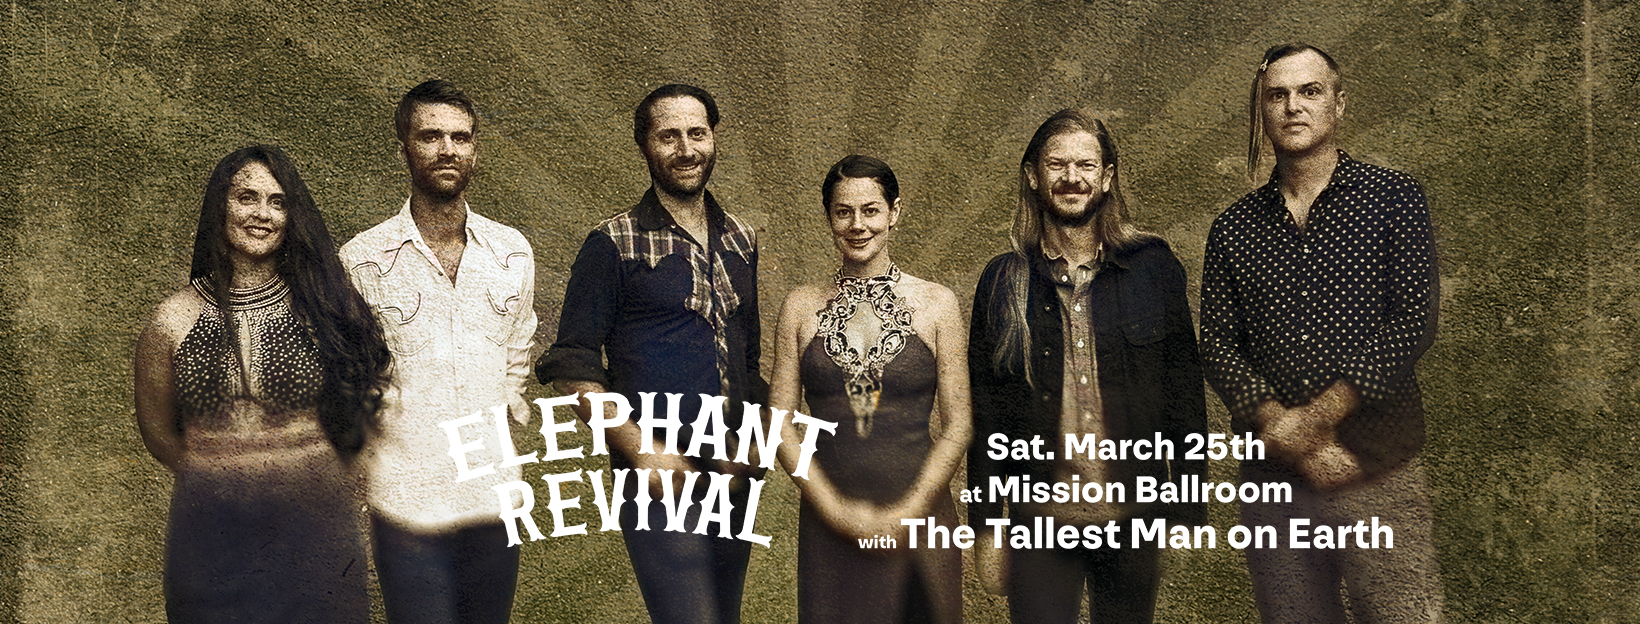 Elephant Revival two months away from their Mission Ballroom show